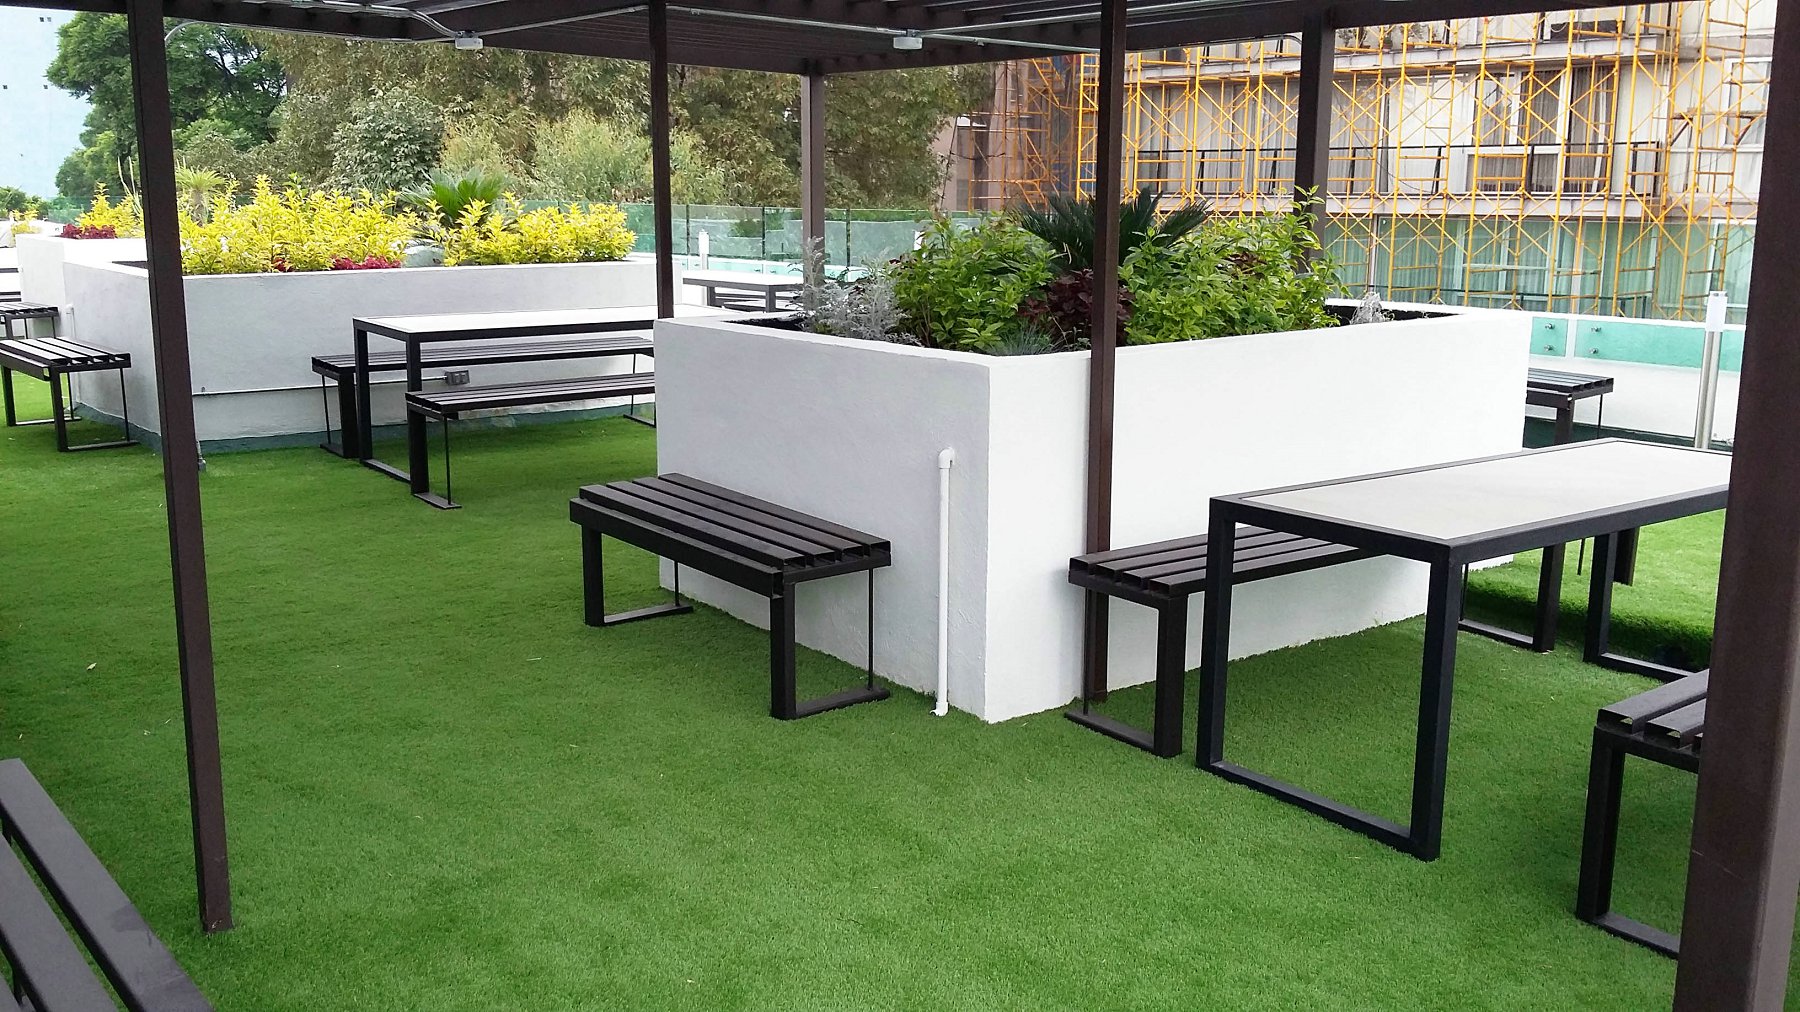 LAY ARTIFICIAL GRASS FOR OUTDOOR RELAXING SPACE 